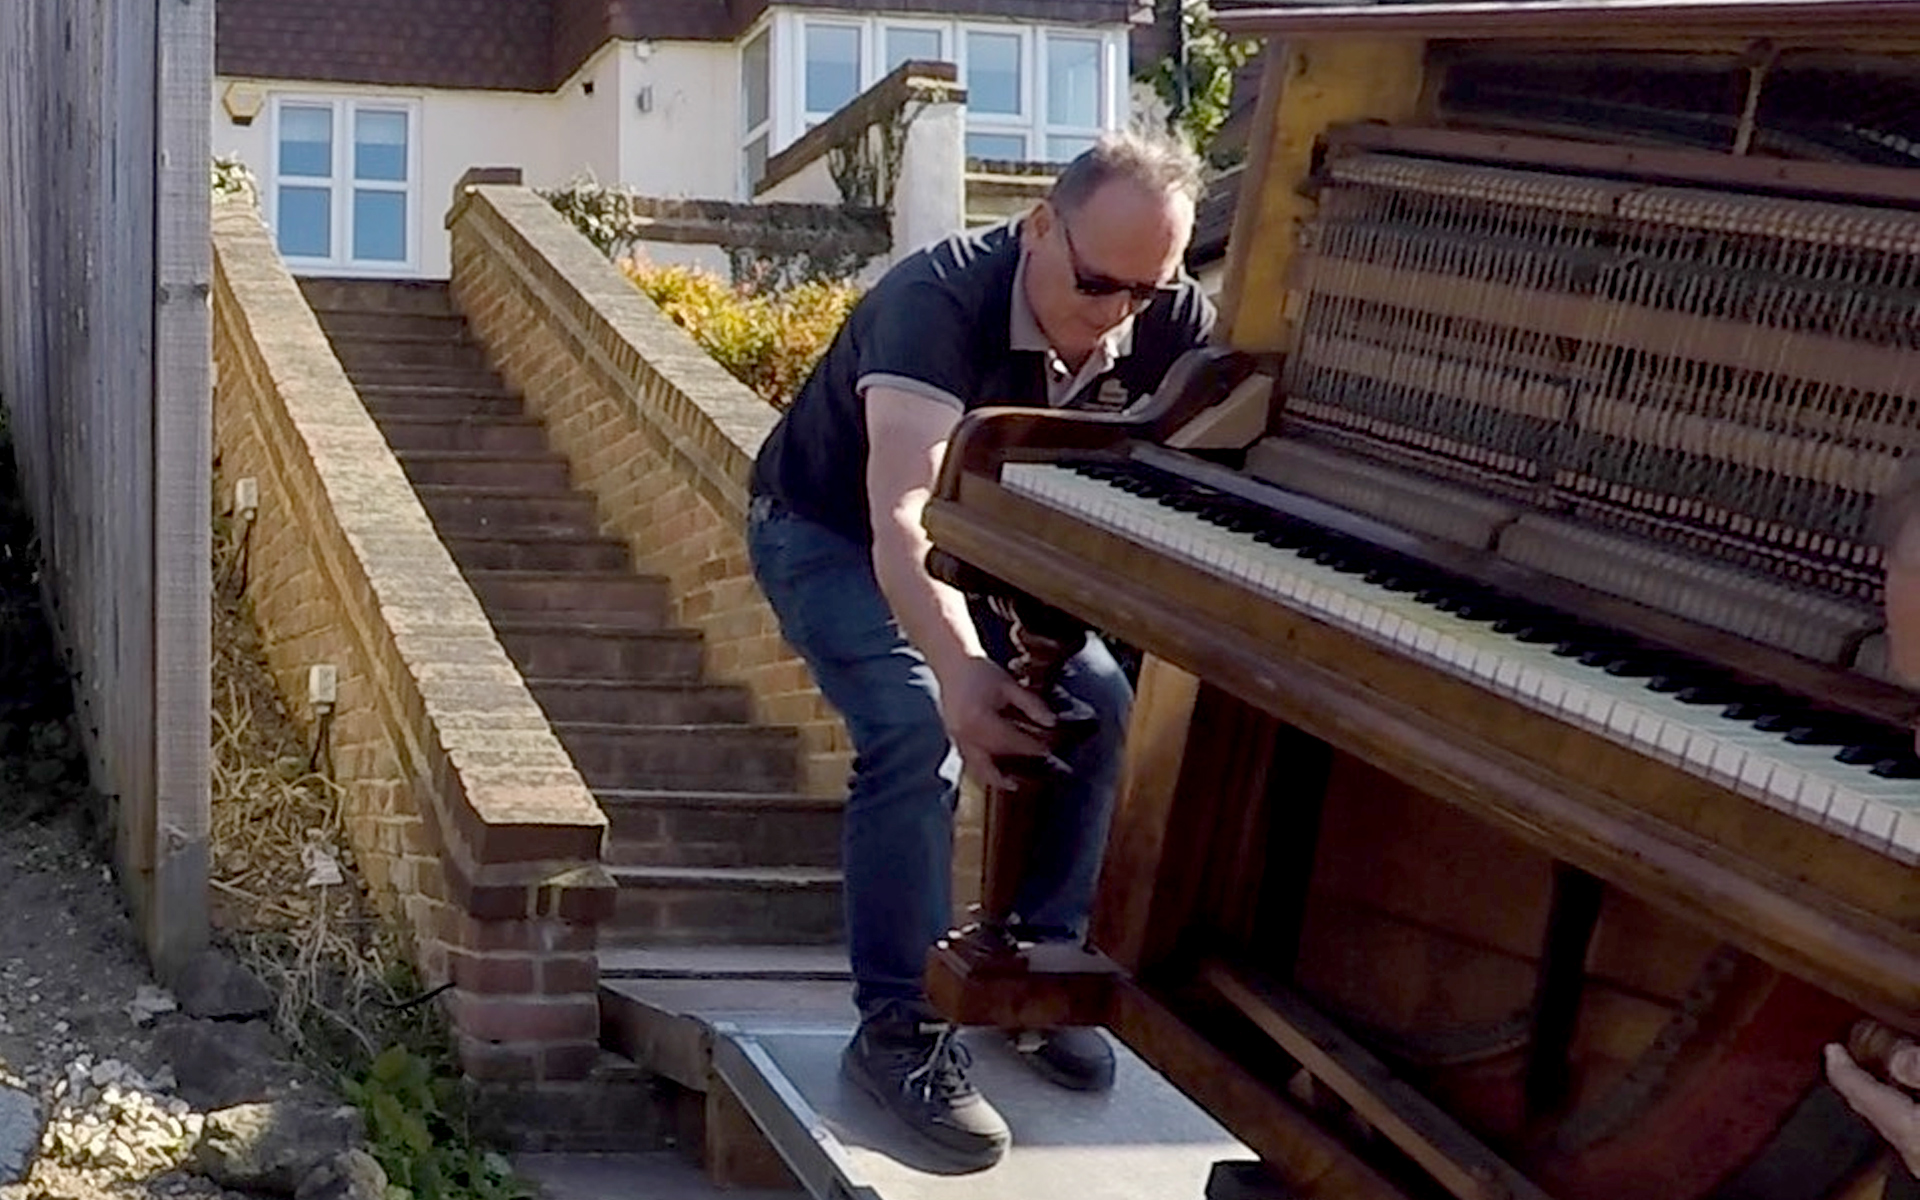 Moving a heavy piano up steep steps